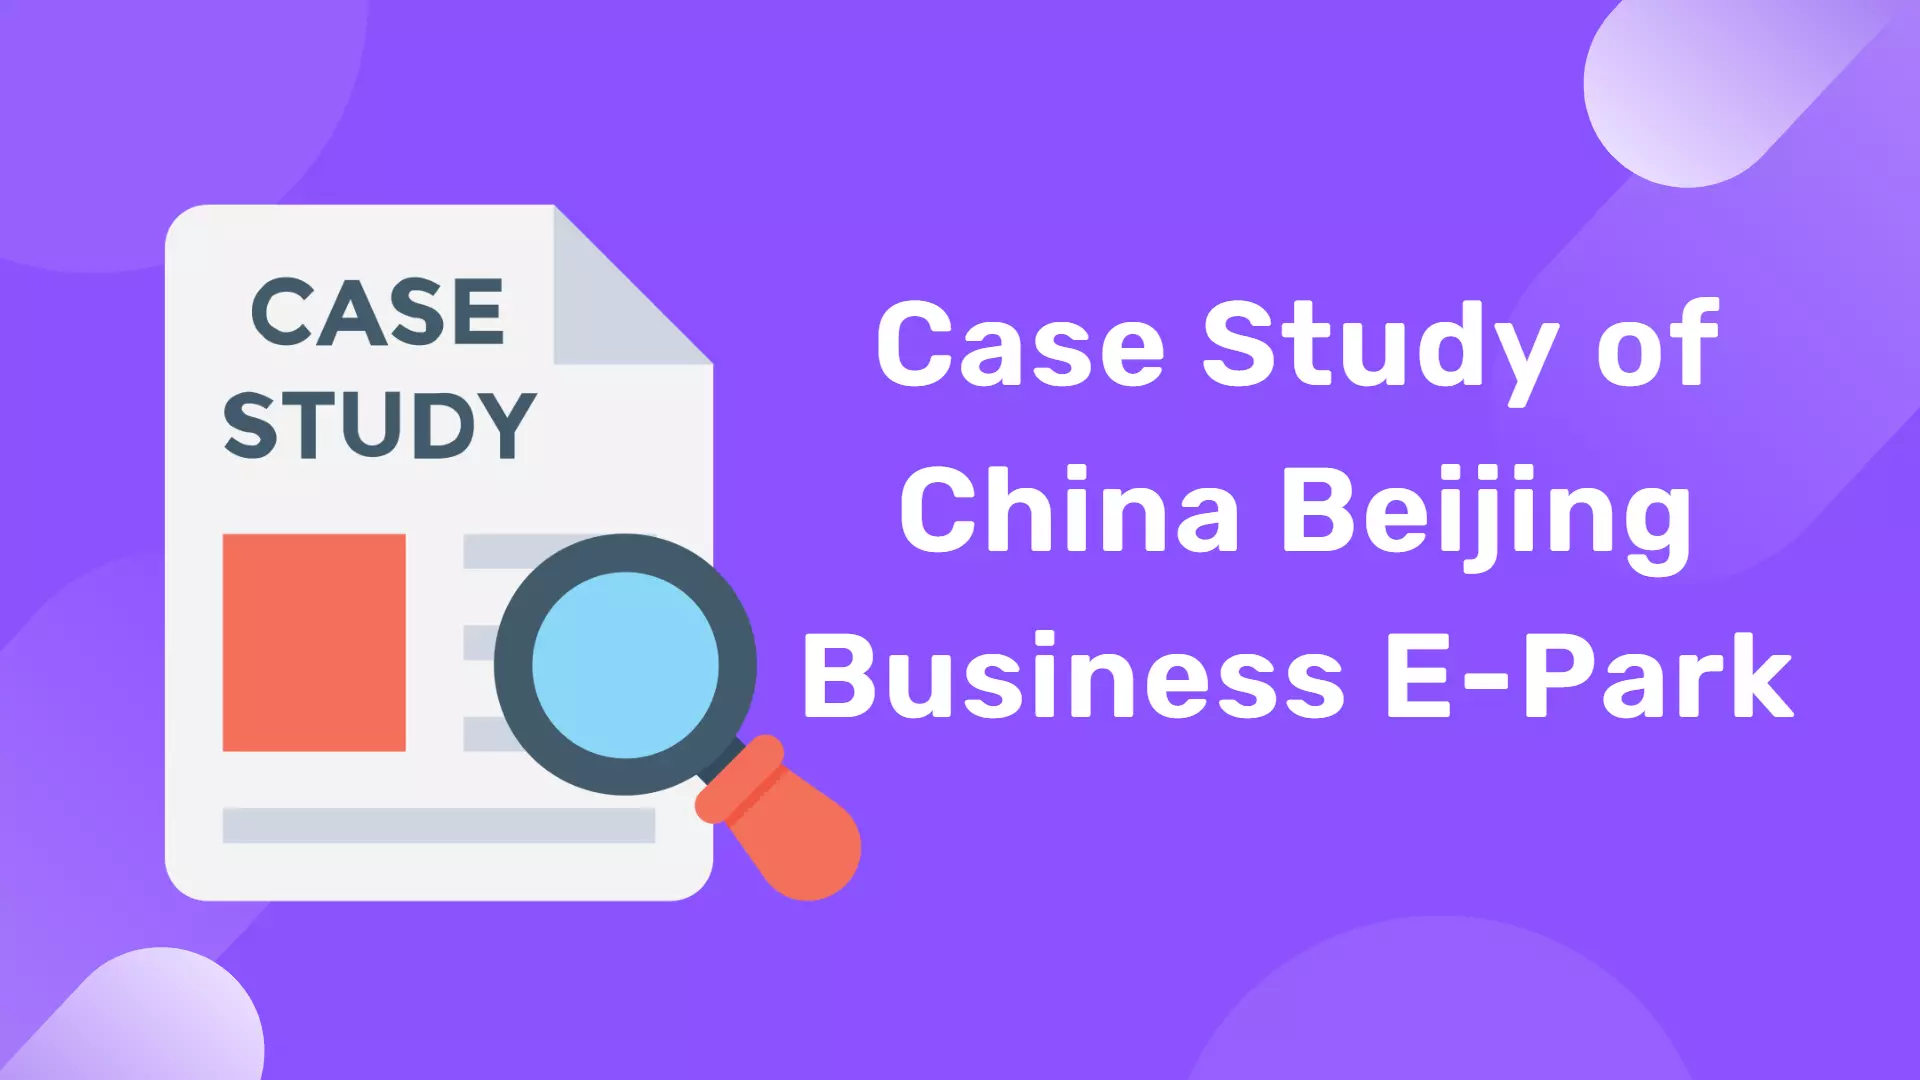 Case study On E-Commerce in China's Capital City